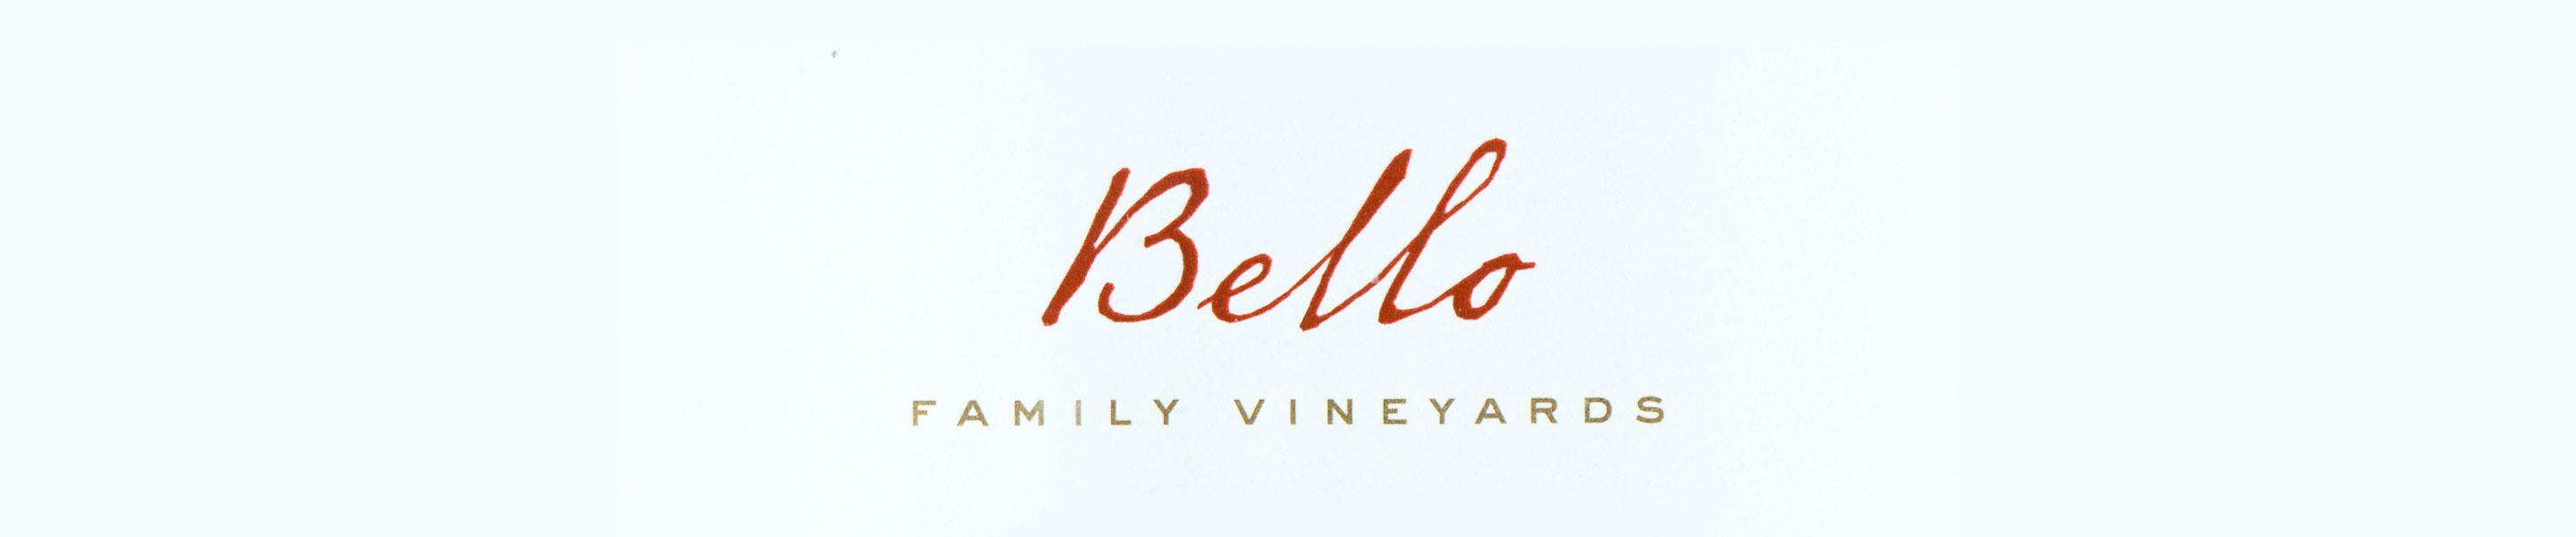 Bello Family Vineyards is a small, family-owned winery in Napa Valley producing extraordinary wines from our estate vineyard in Rutherford. The production team is lead by Michael Bello, who is flanked by son Christopher Bello and winemaker Ross Wallace. The three of them combined make for a powerful force in the industry, and the wines they produce reflect their passion and commitment to quality.